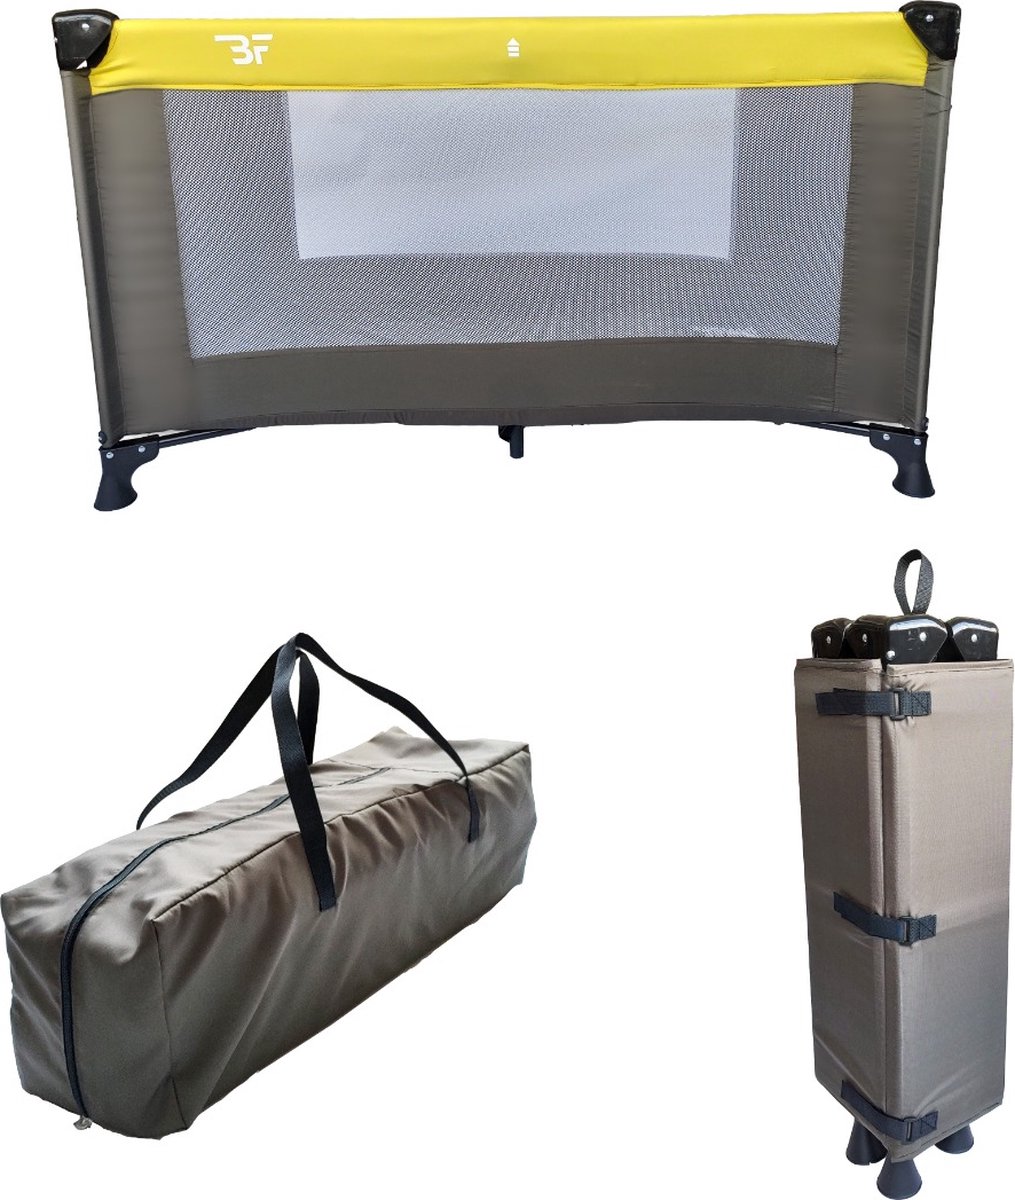 Bebies First Campingbedje / Reisbed Inclusief Transporttas 120 x 60 cm - Taupe